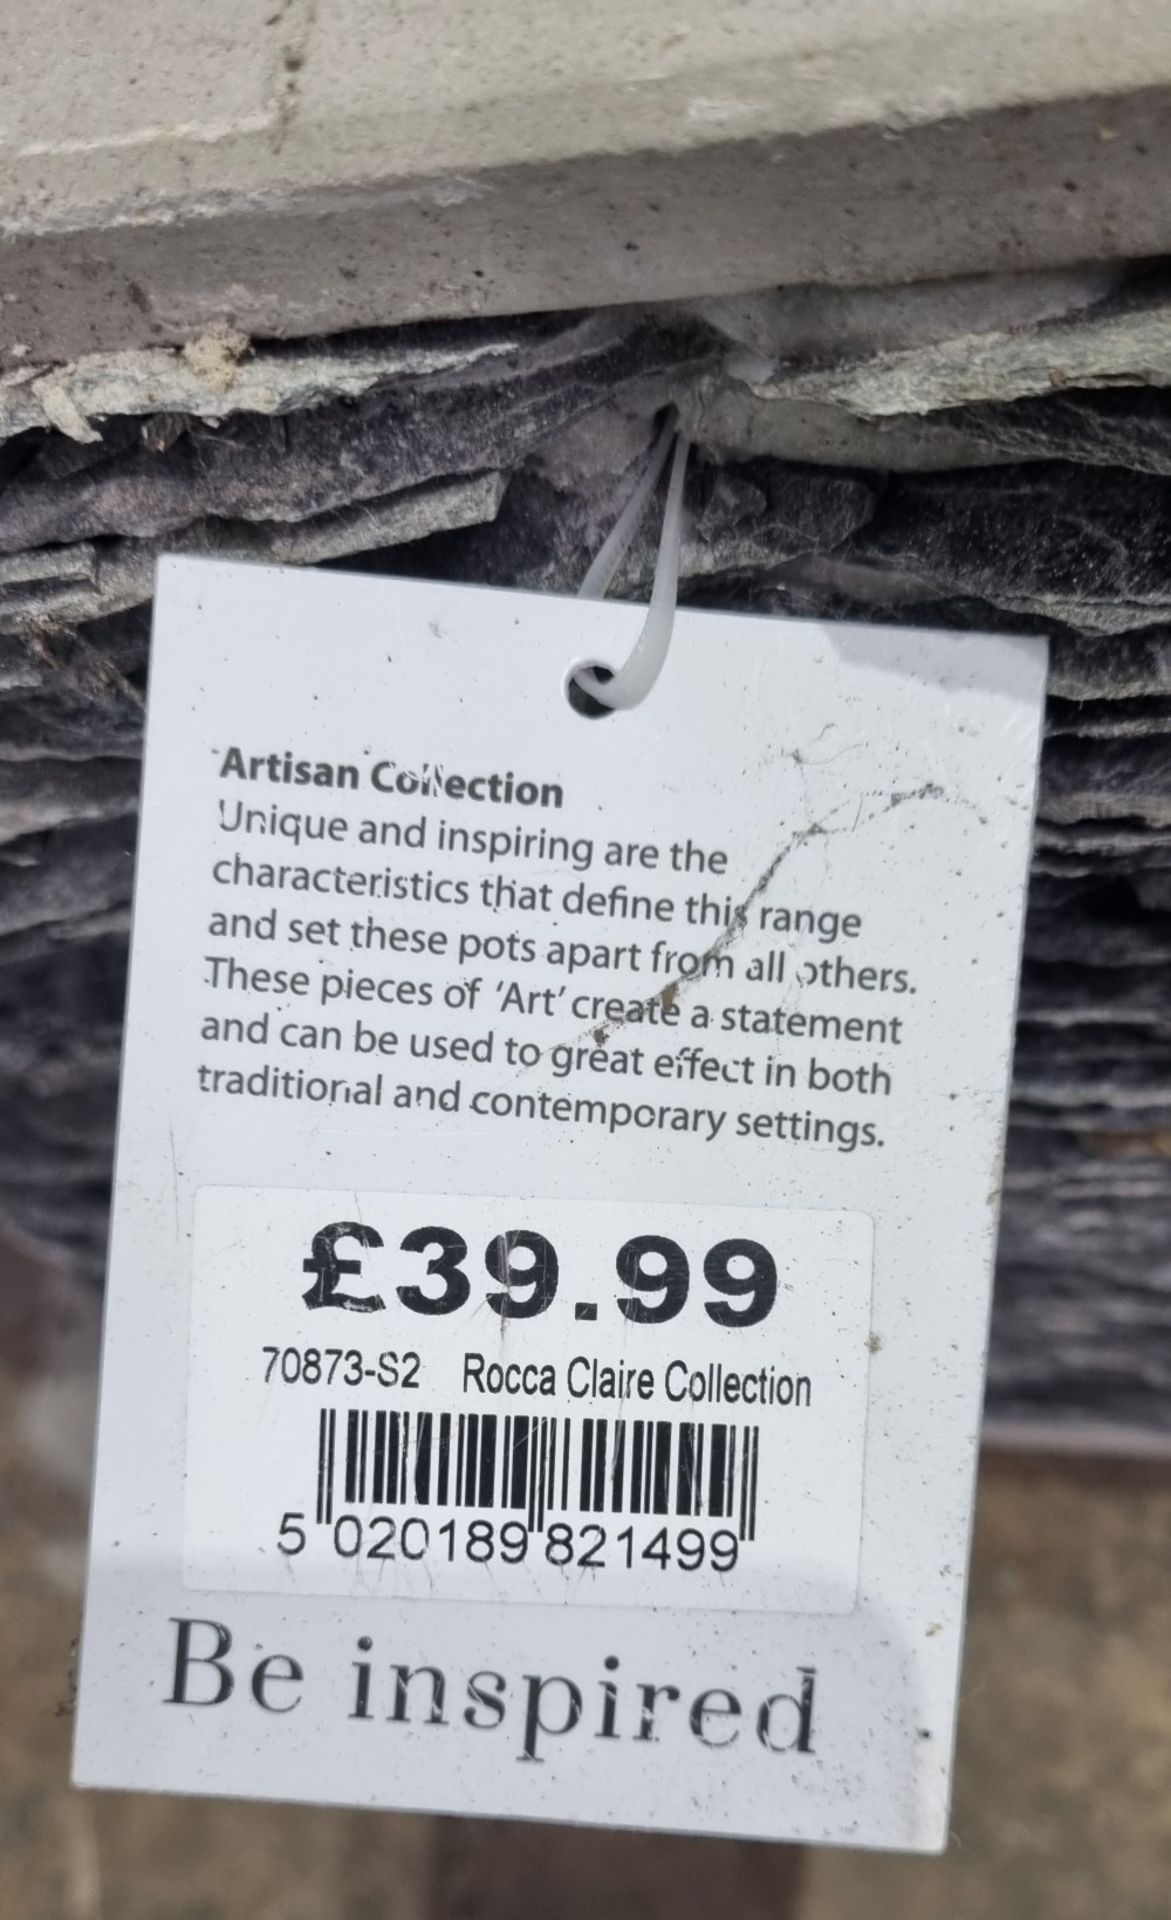 Mims Artisan Rocca Claire Collection 70873-S2 Slate Planter | 300mm x 325mm | RRP £39.99 - Image 3 of 3